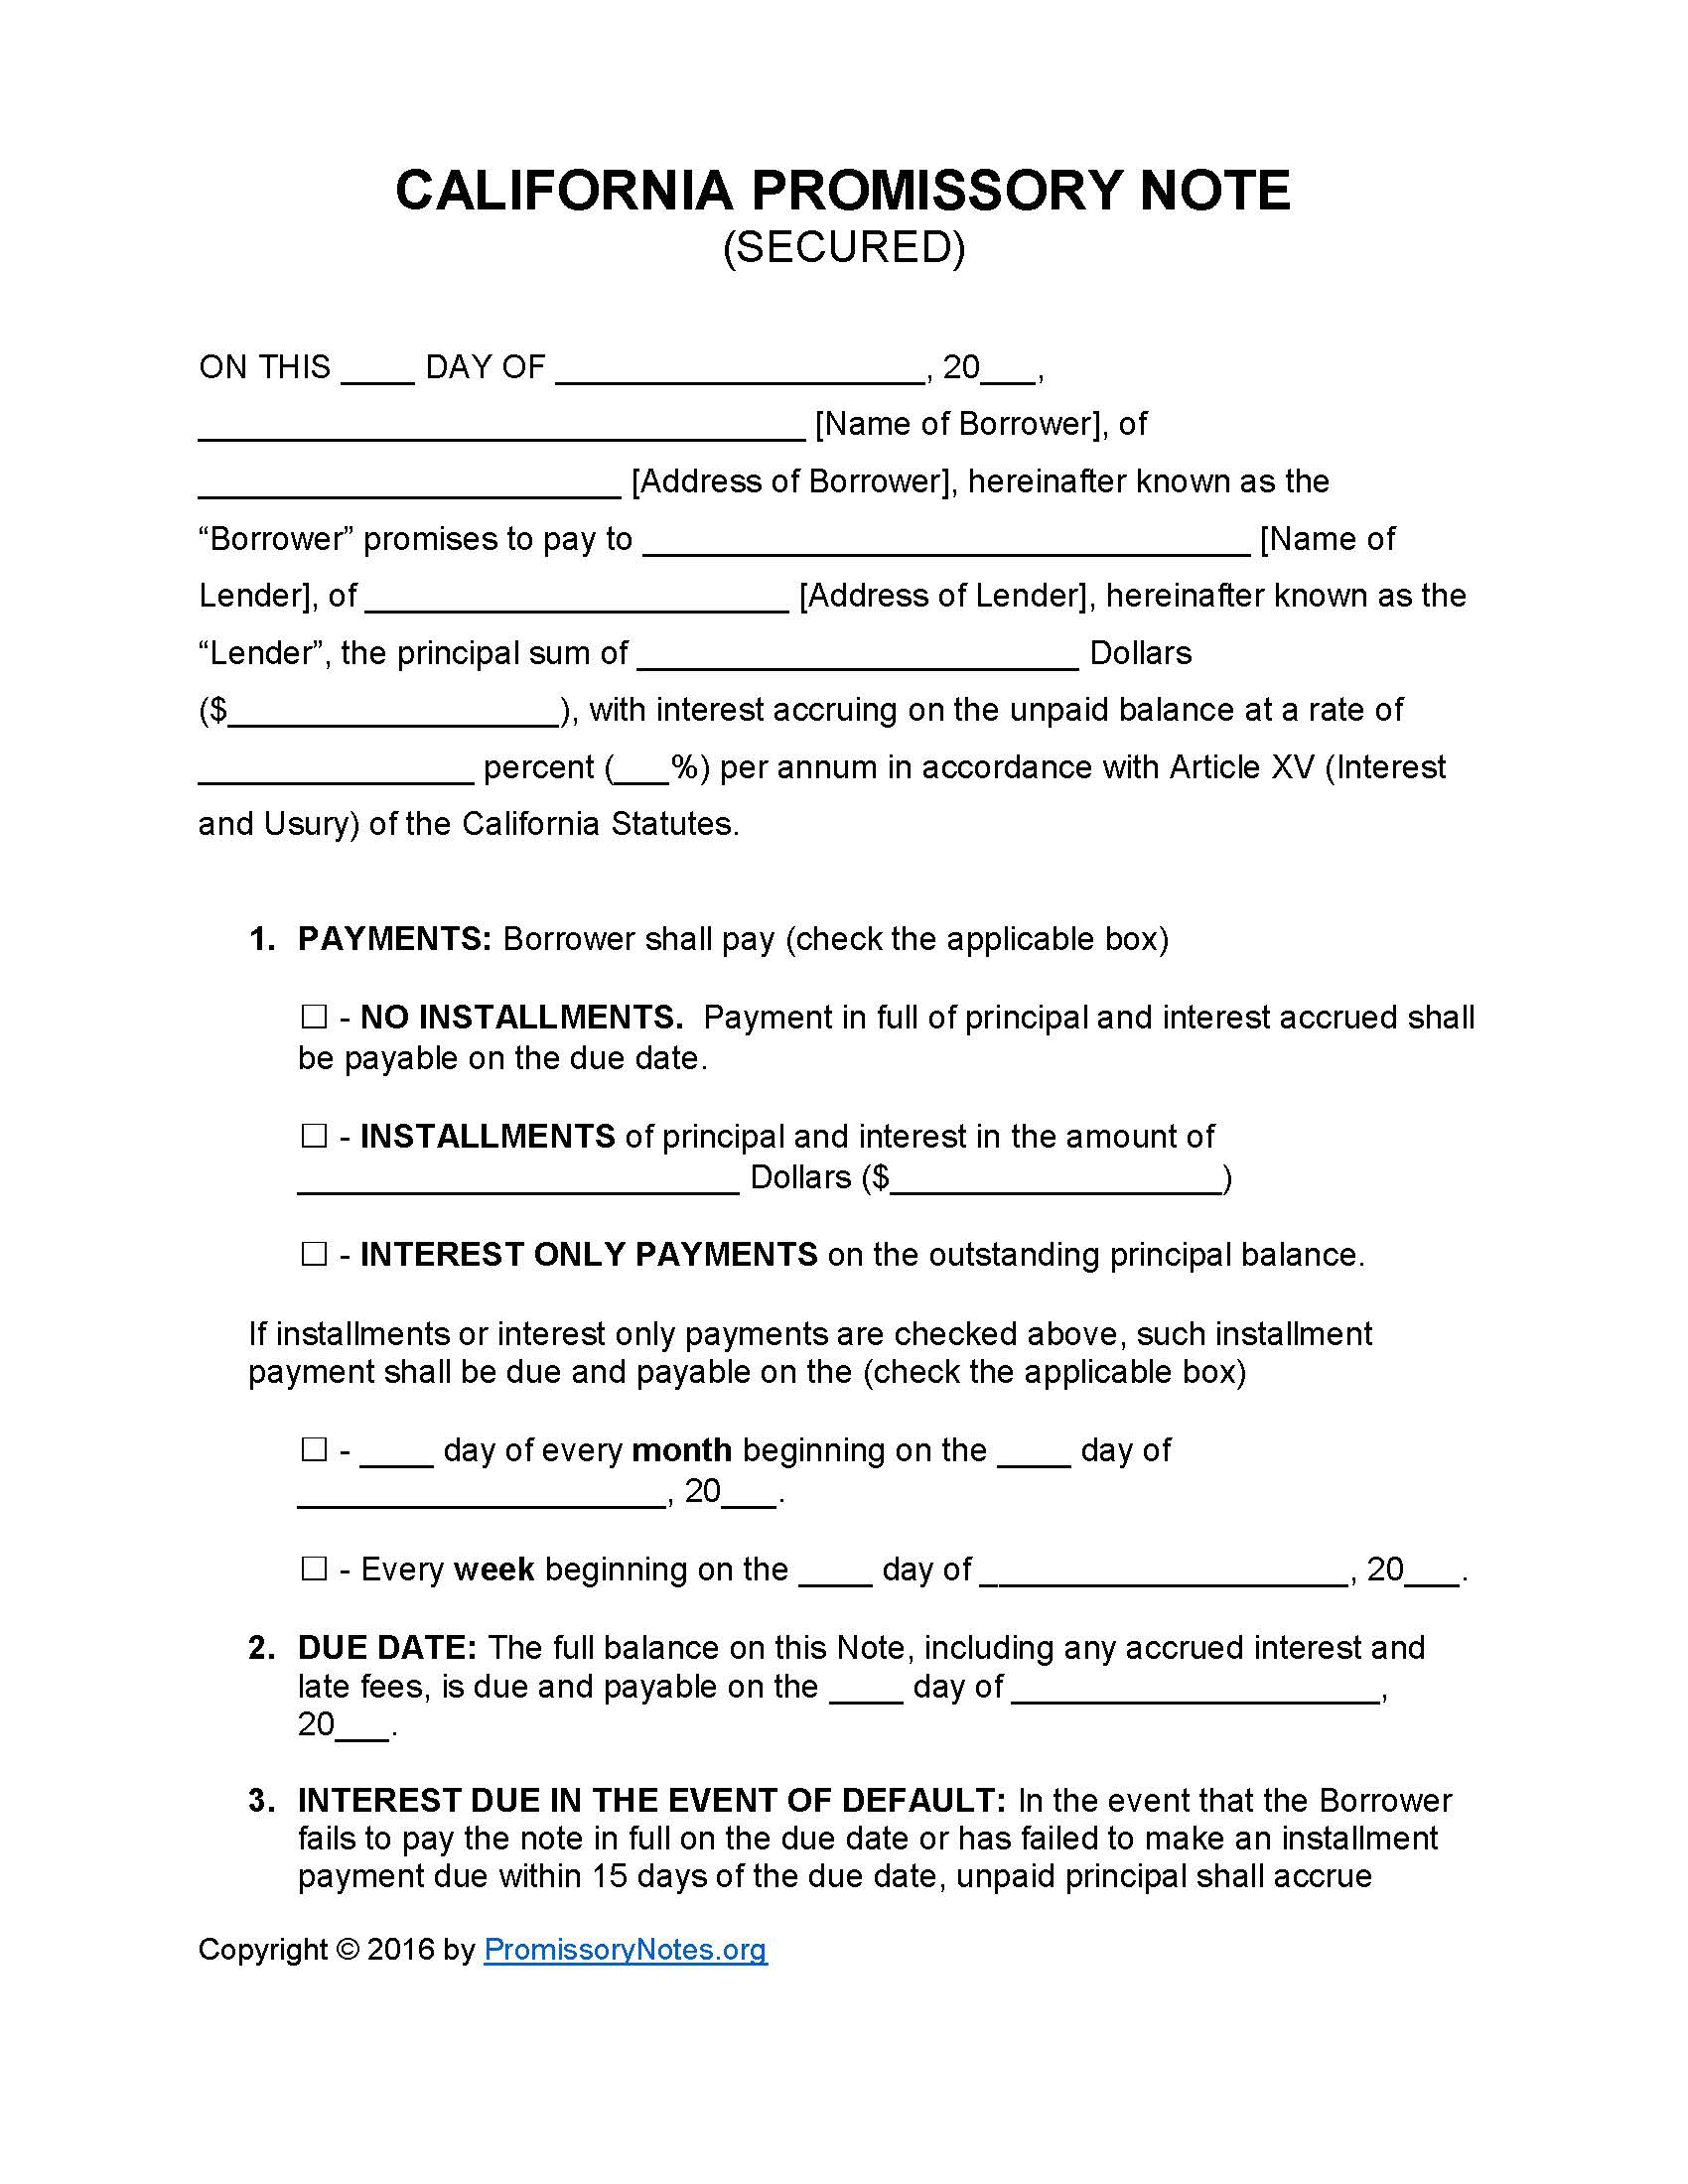 california-secured-promissory-note-form